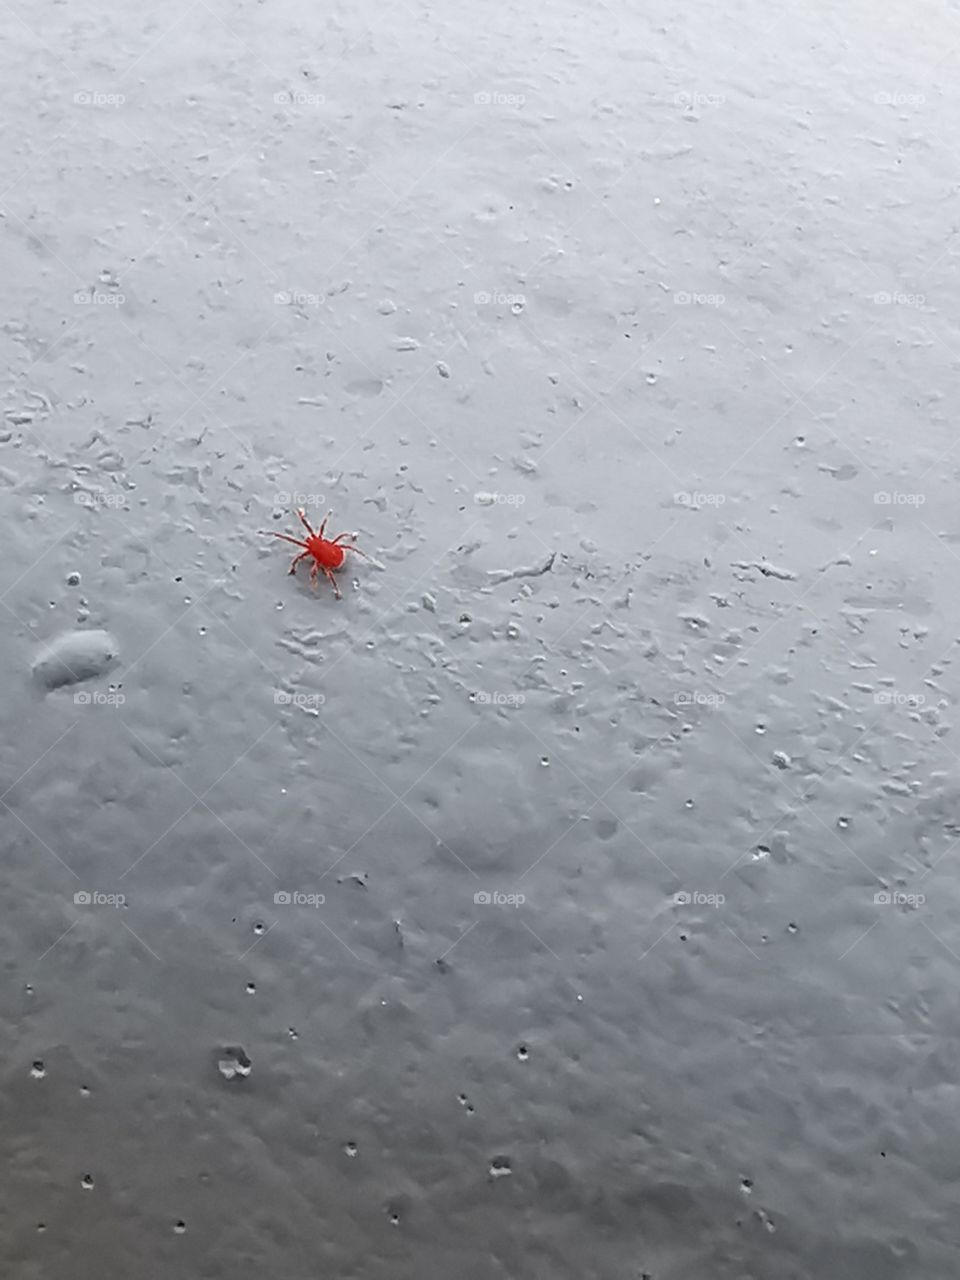 Tiny red bug